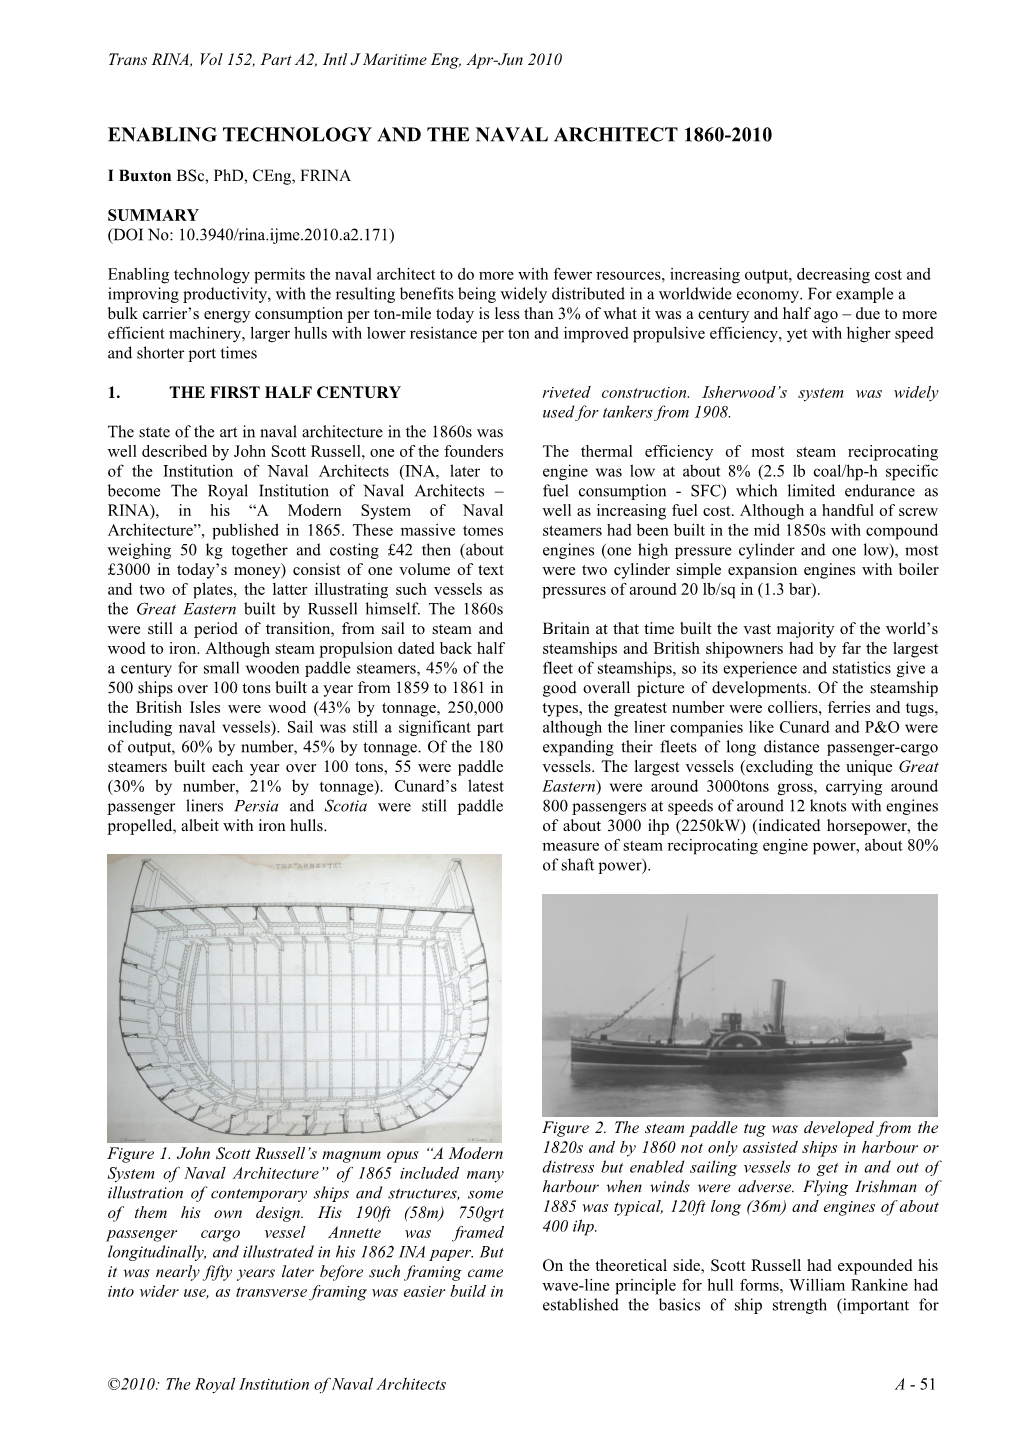 Enabling Technology and the Naval Architect 1860-2010